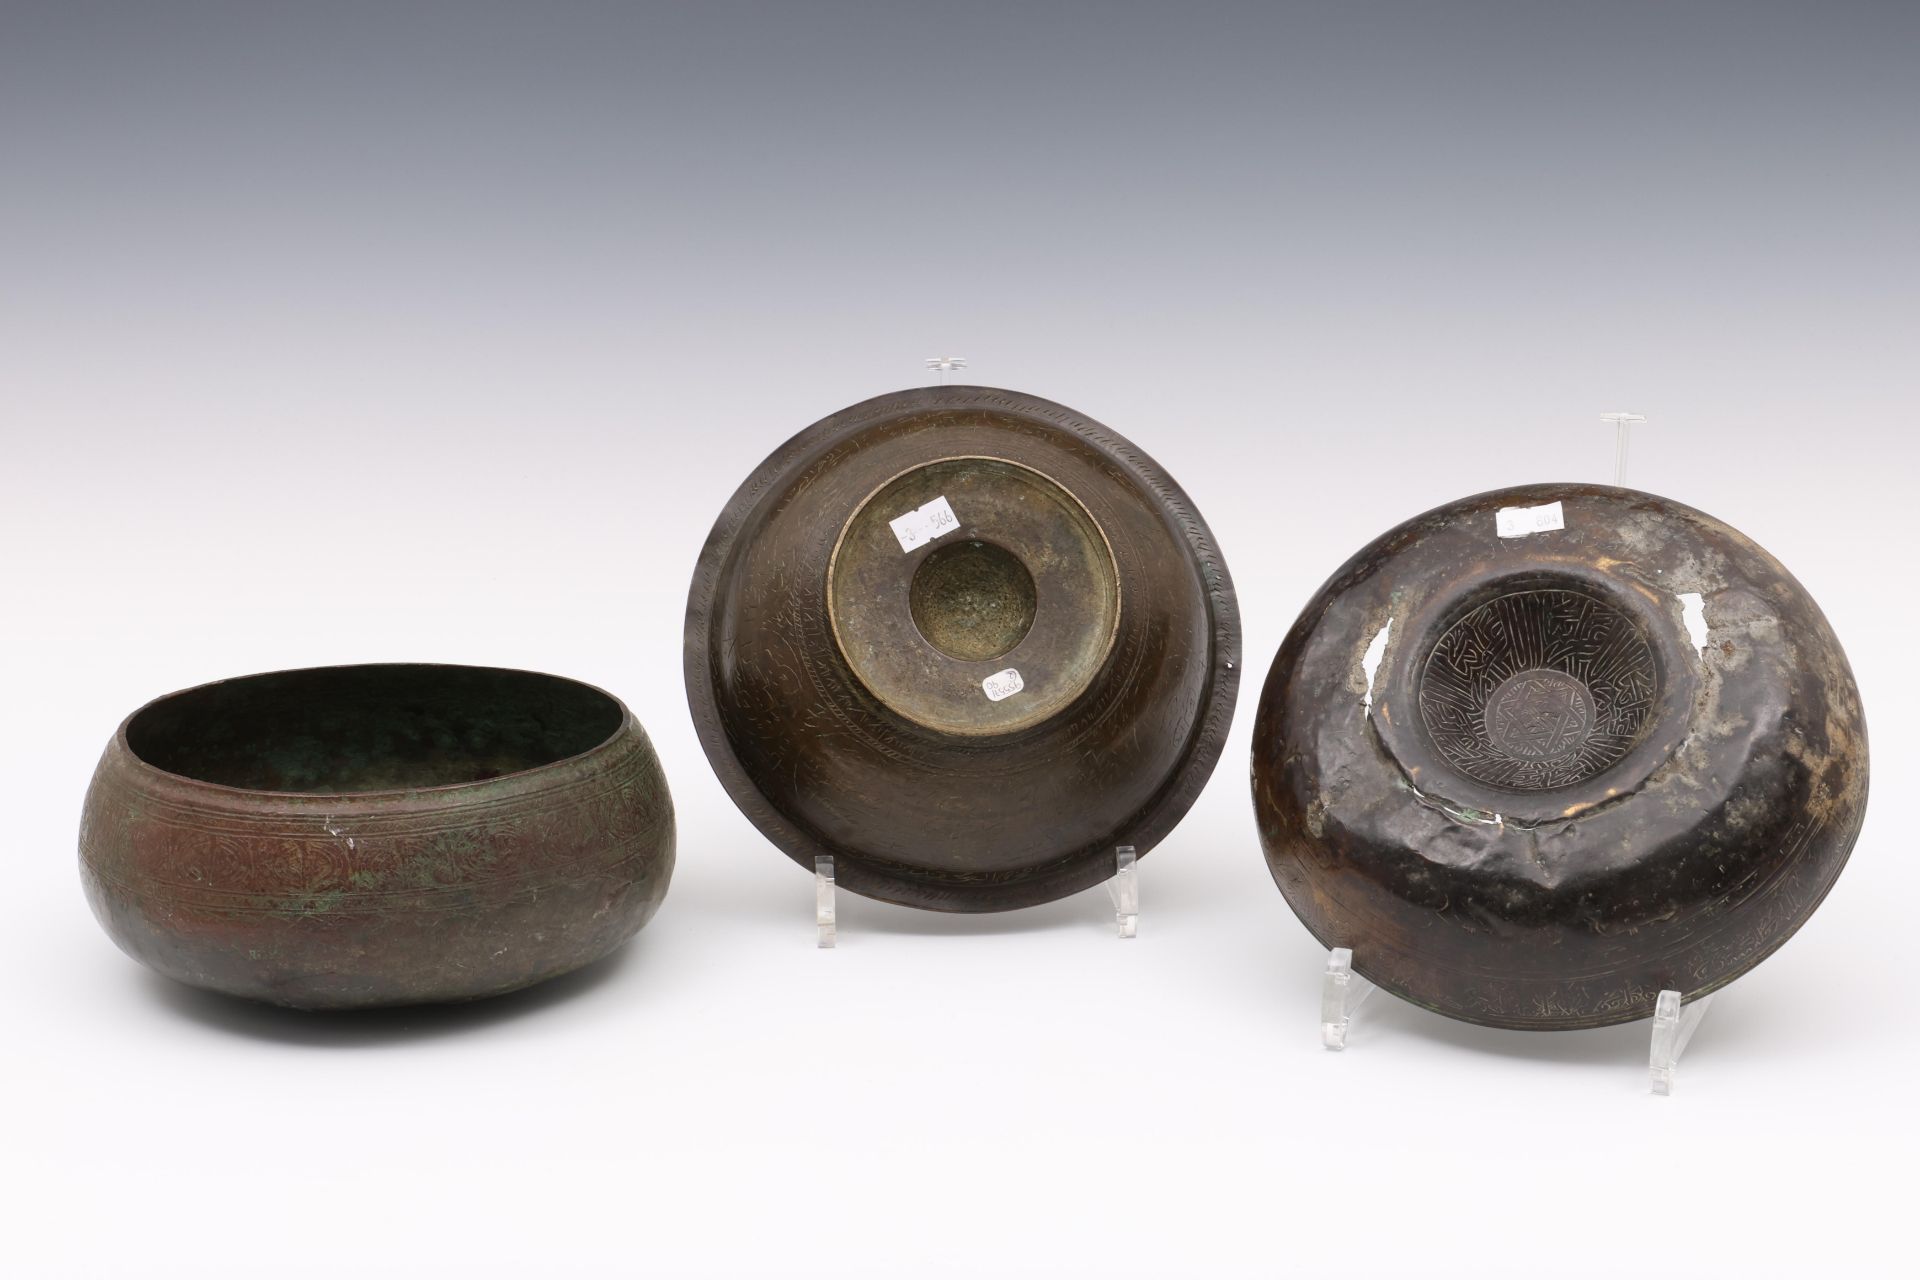 Persian bronze magic bowls; two bronze bowls with elevated middle, possibly Salavid, 17th century - Image 3 of 3